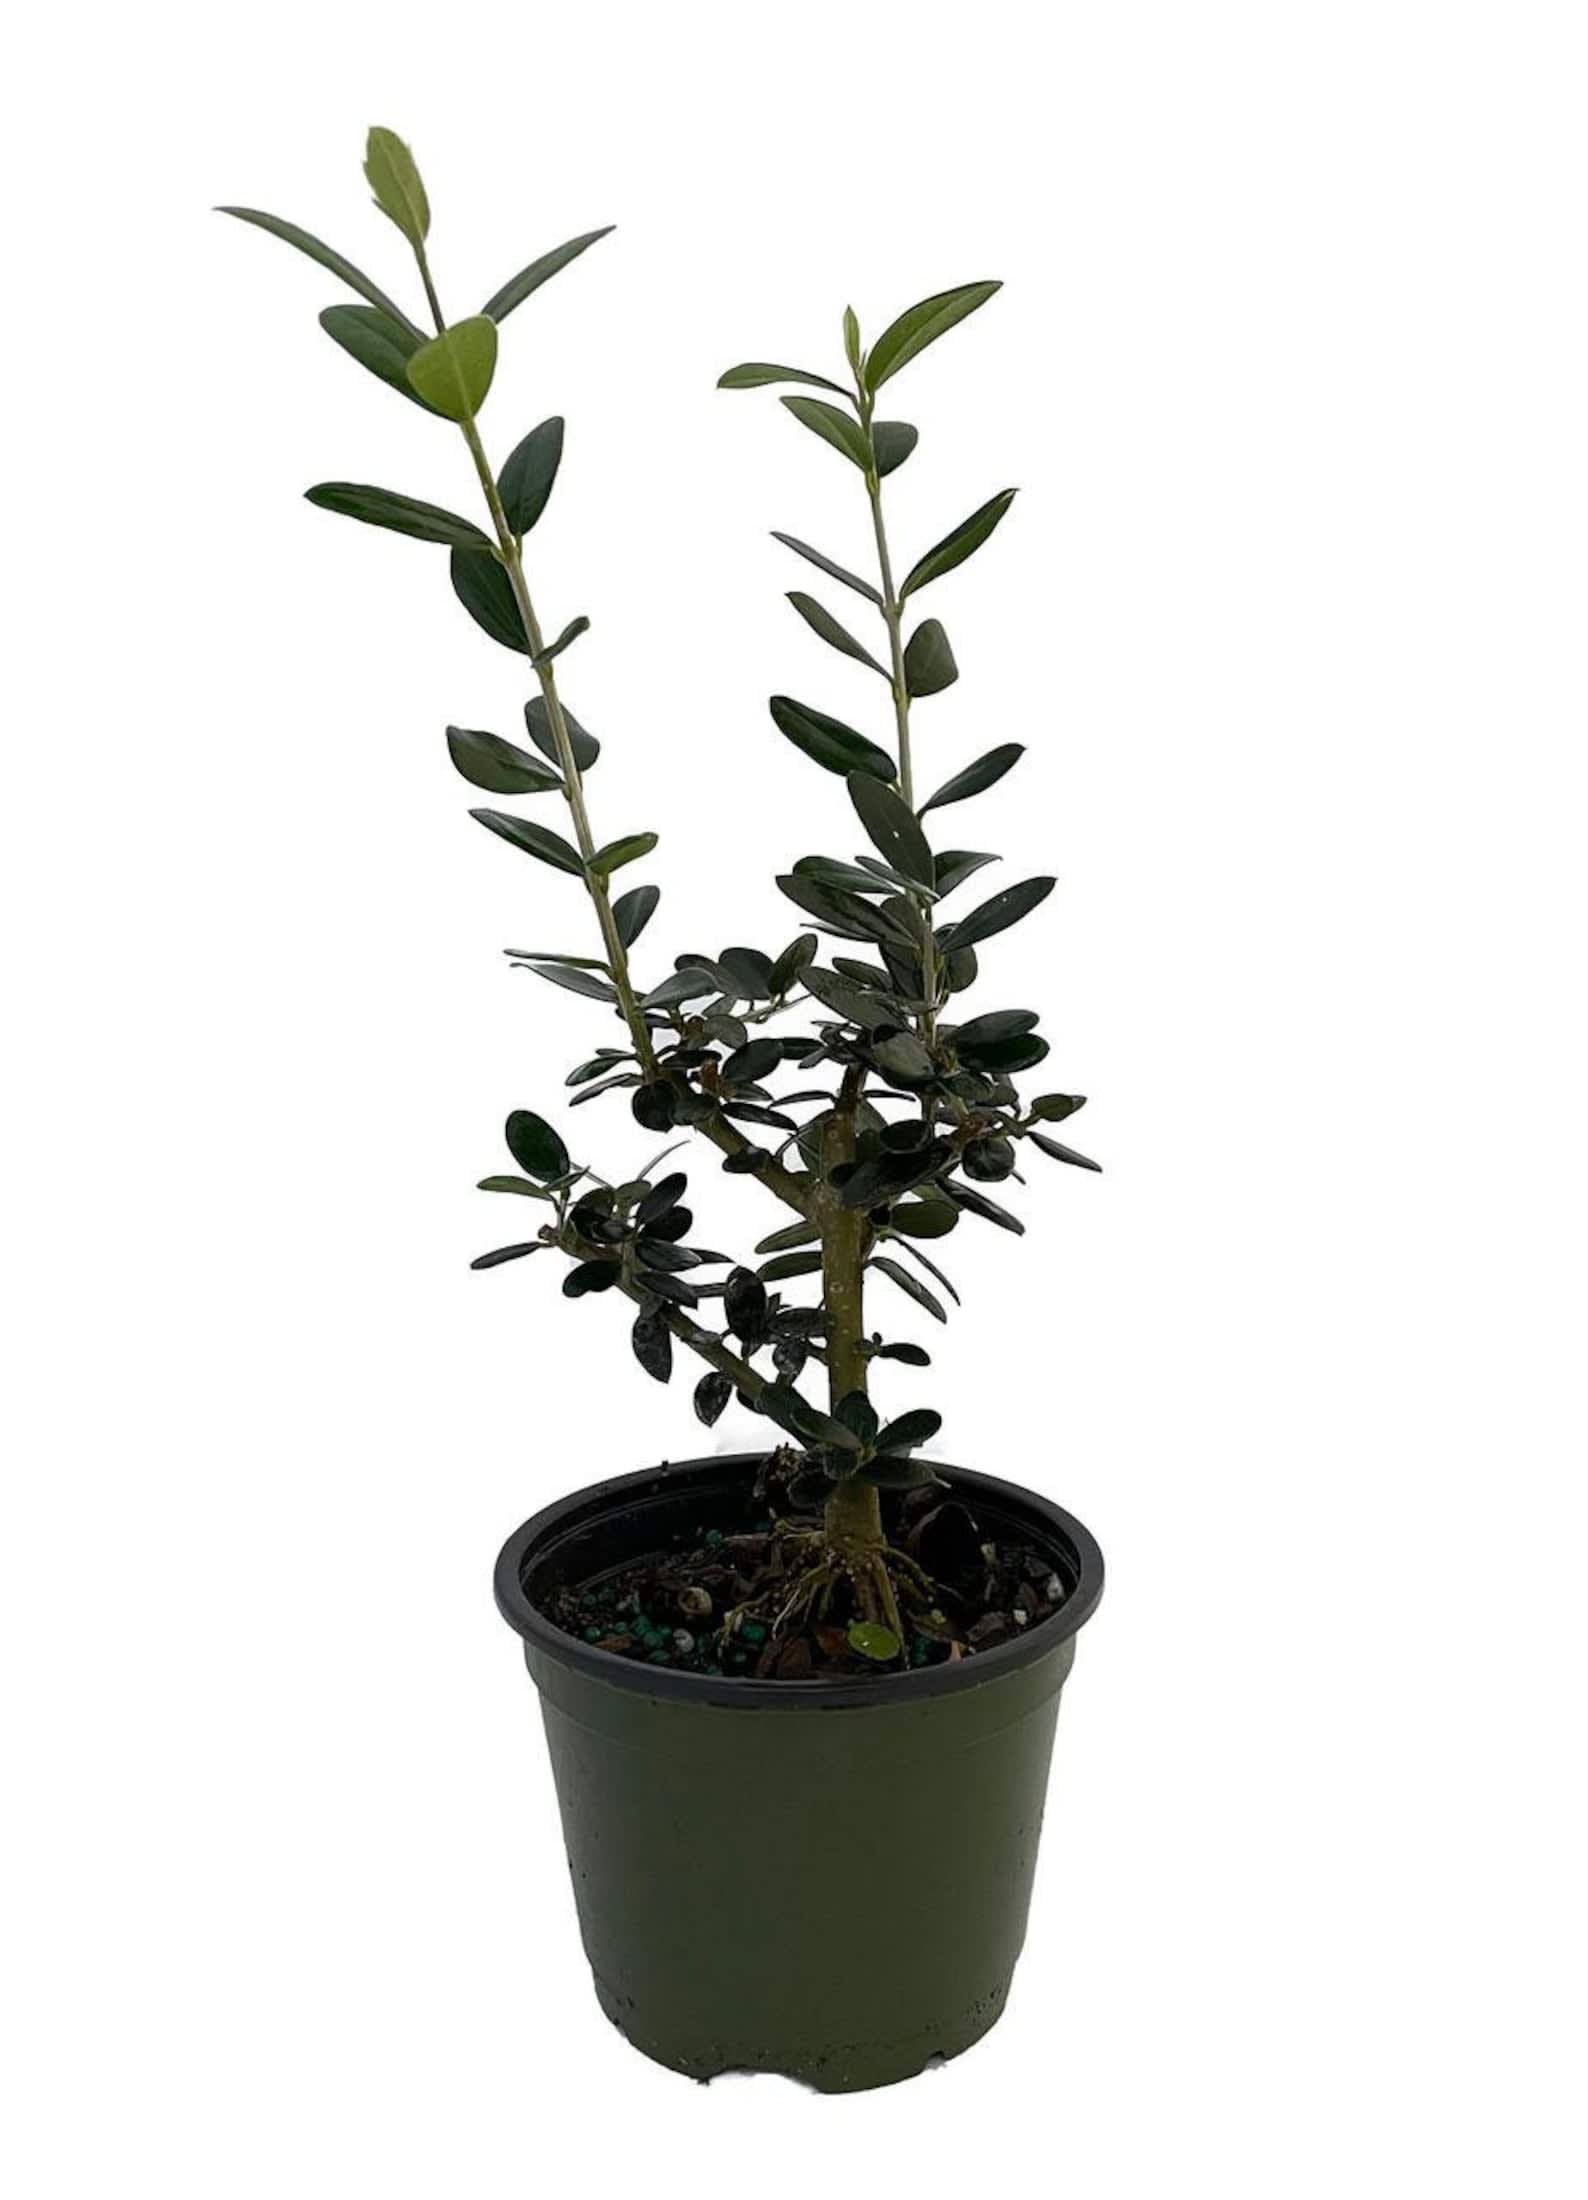 How to Grow & Care for Olive Trees